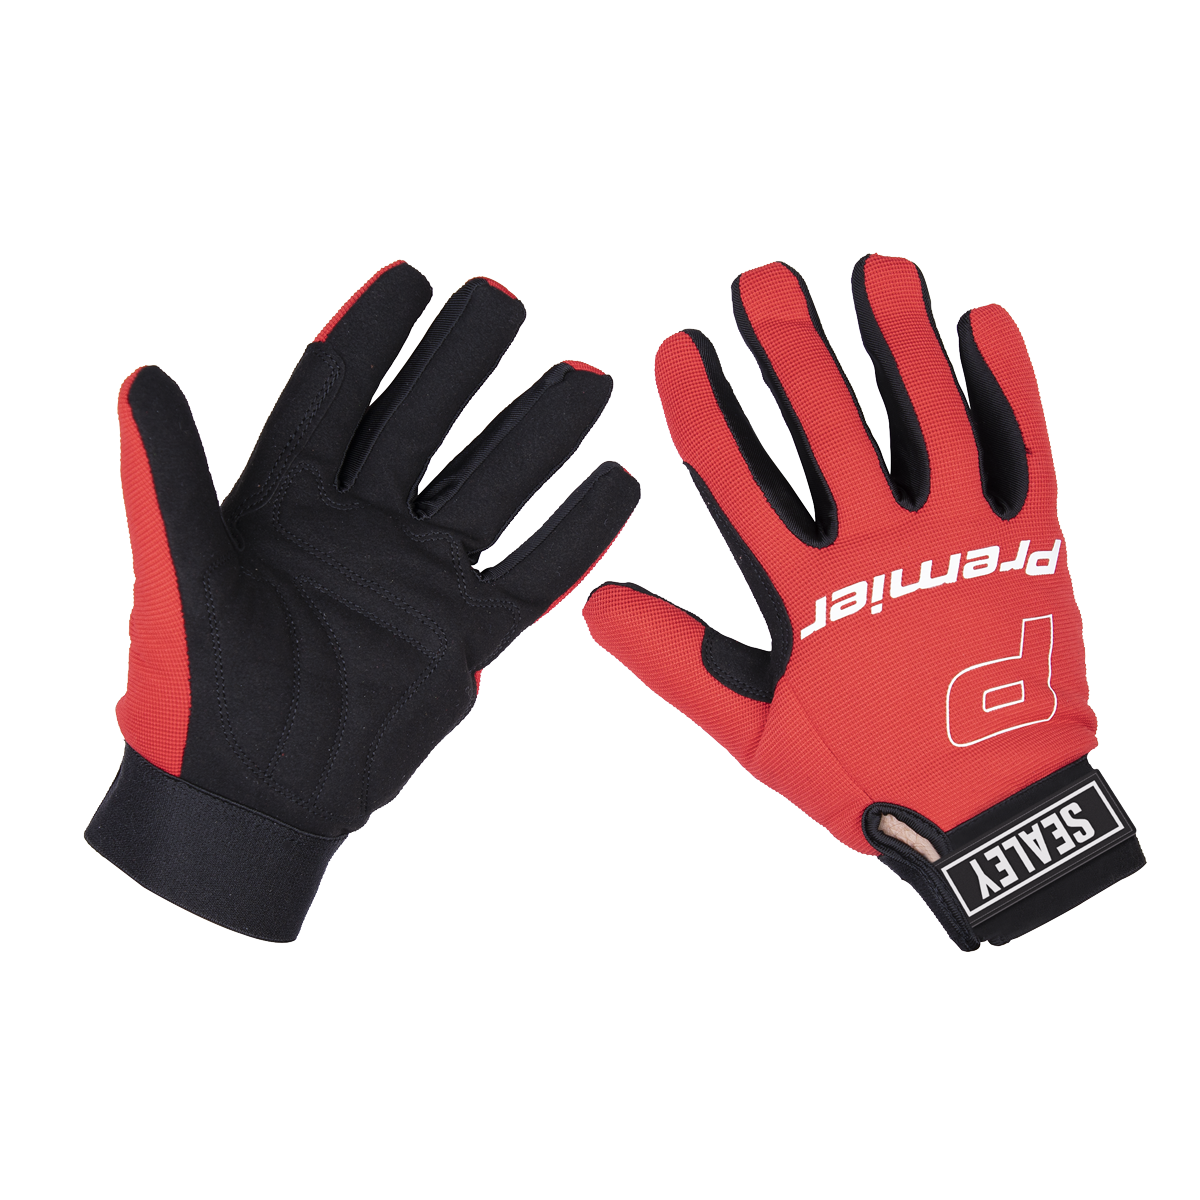 Mechanic's Gloves Padded Palm - Extra-Large Pair